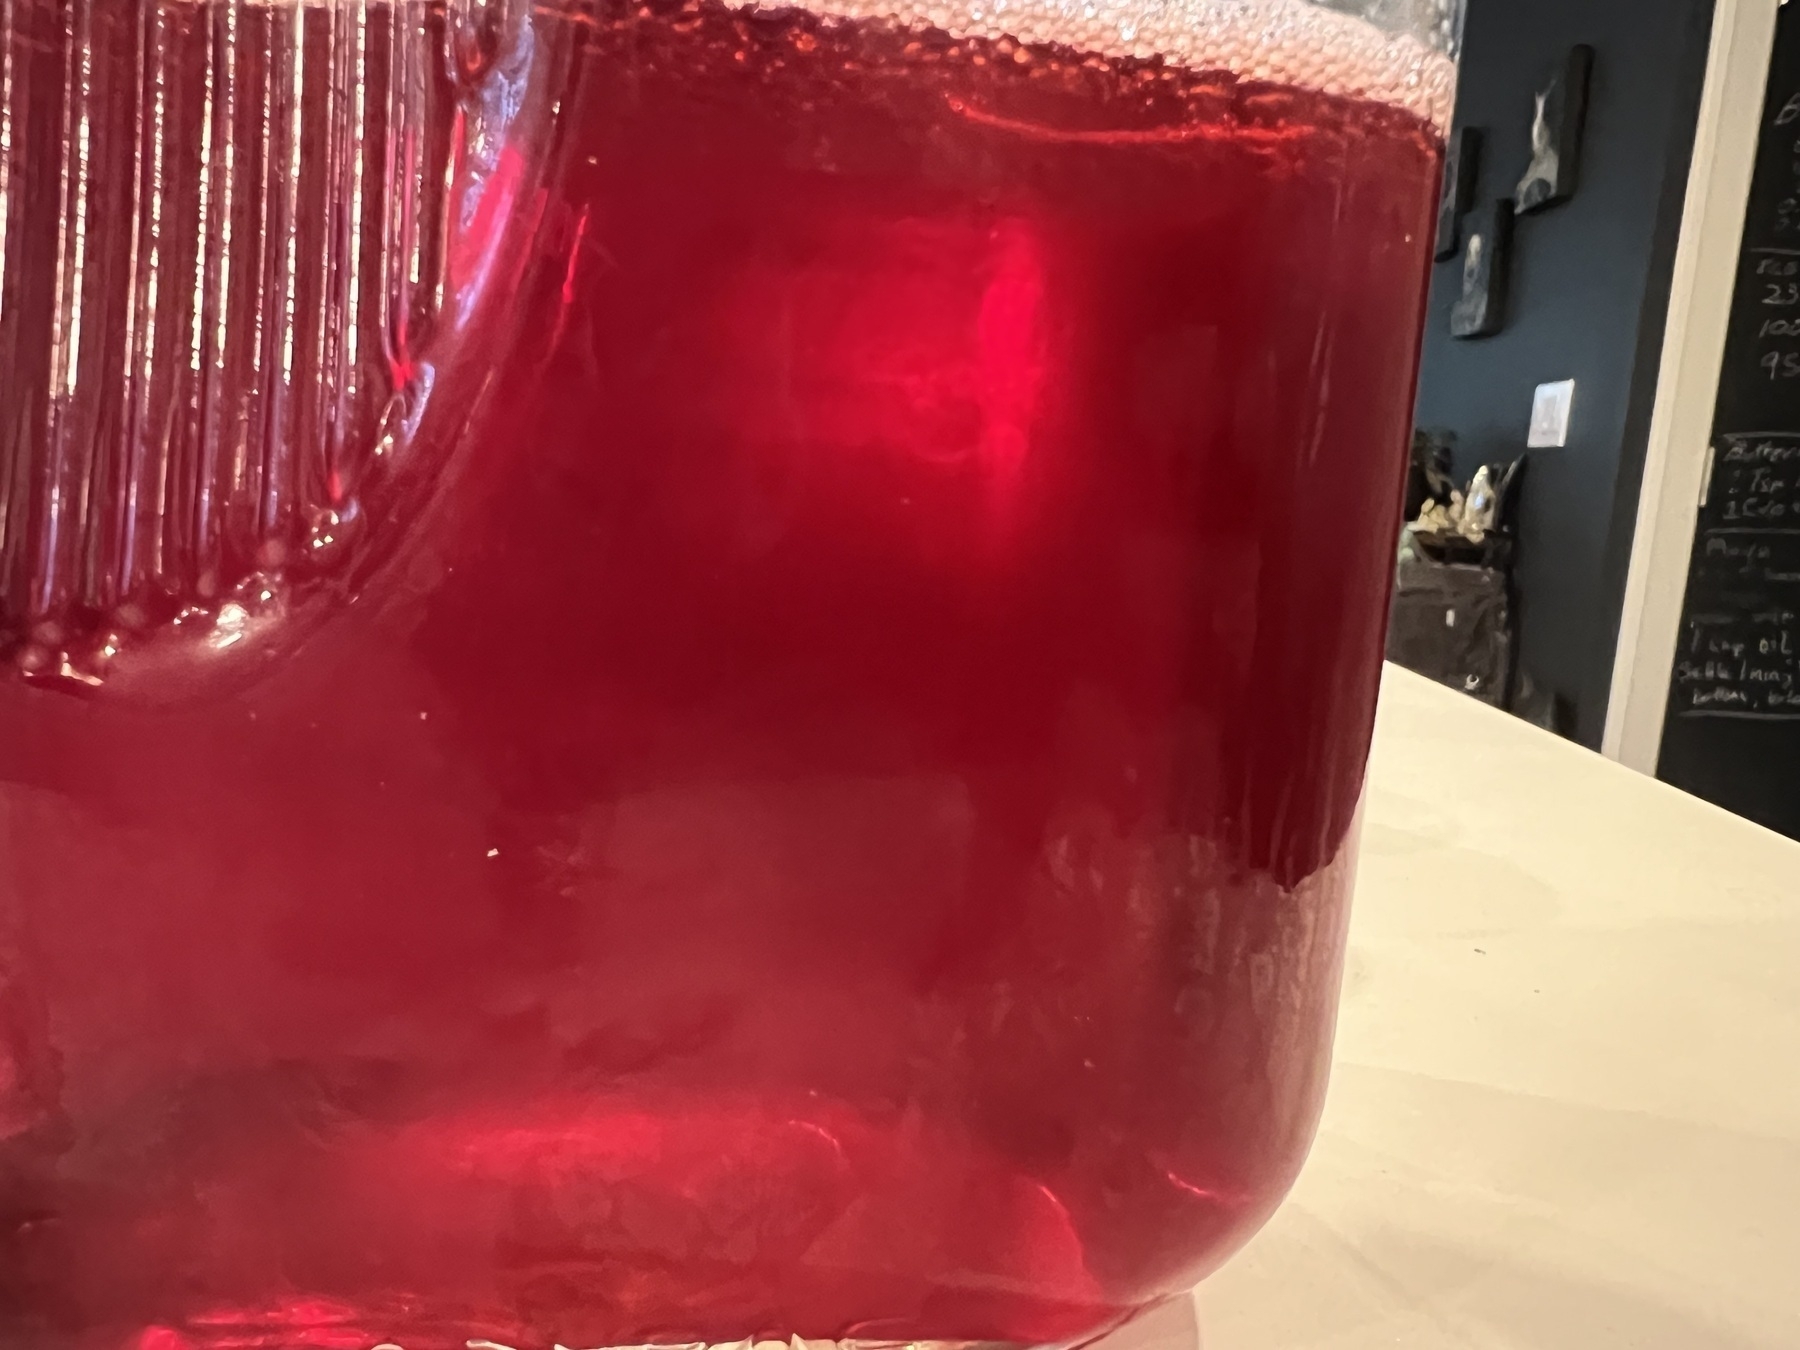 Clarified cranberry tonic one to one symple syrup